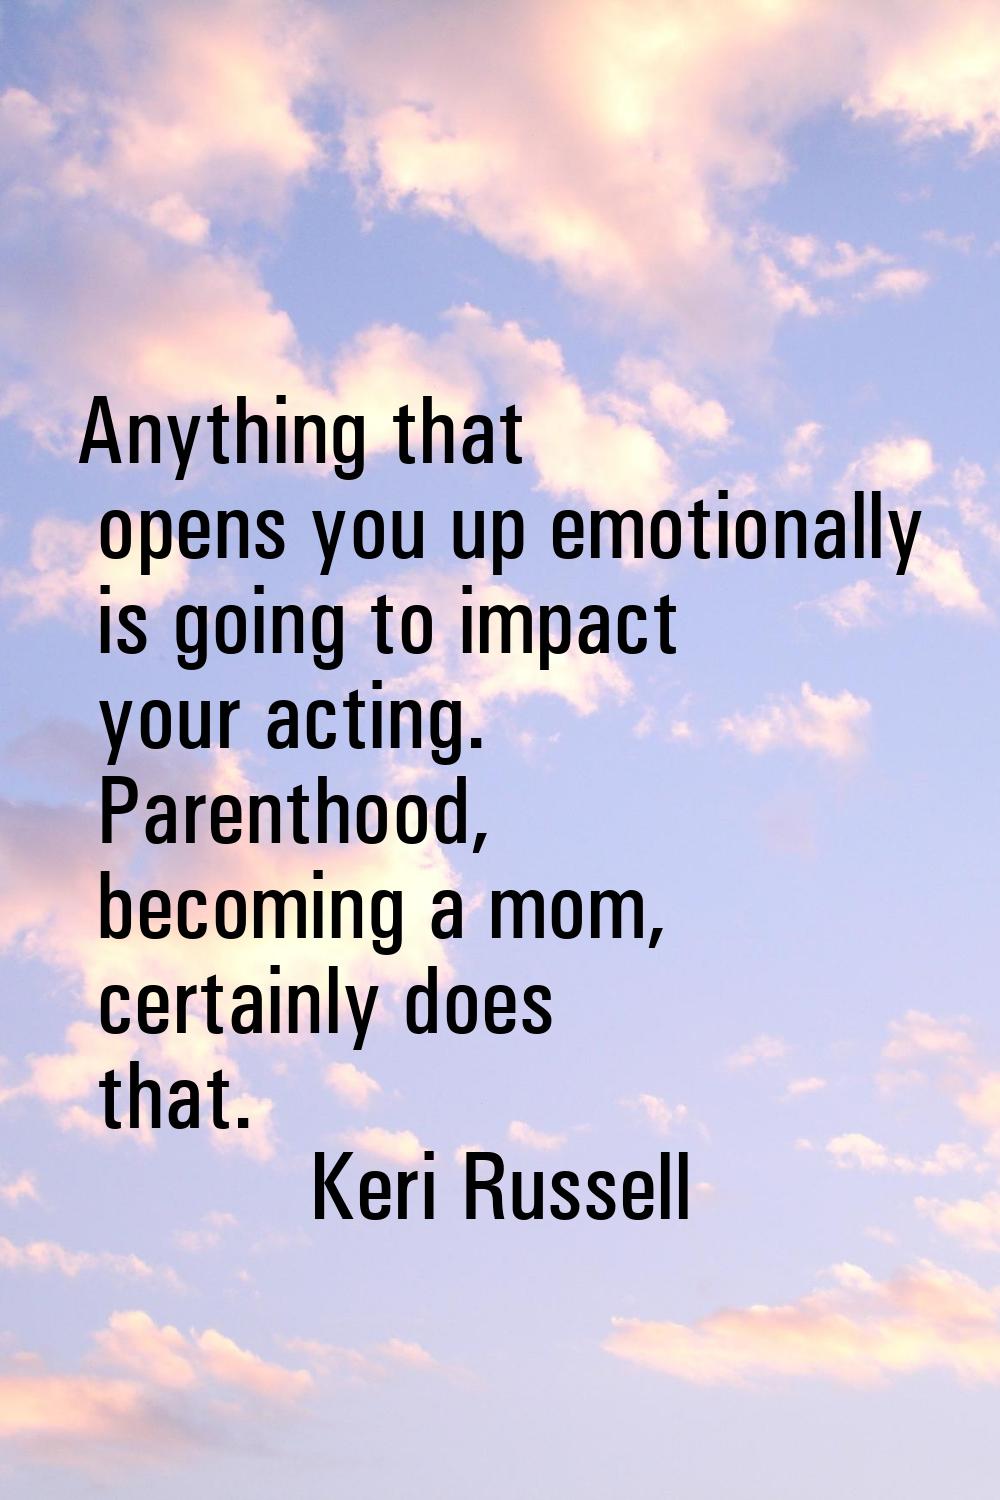 Anything that opens you up emotionally is going to impact your acting. Parenthood, becoming a mom, 